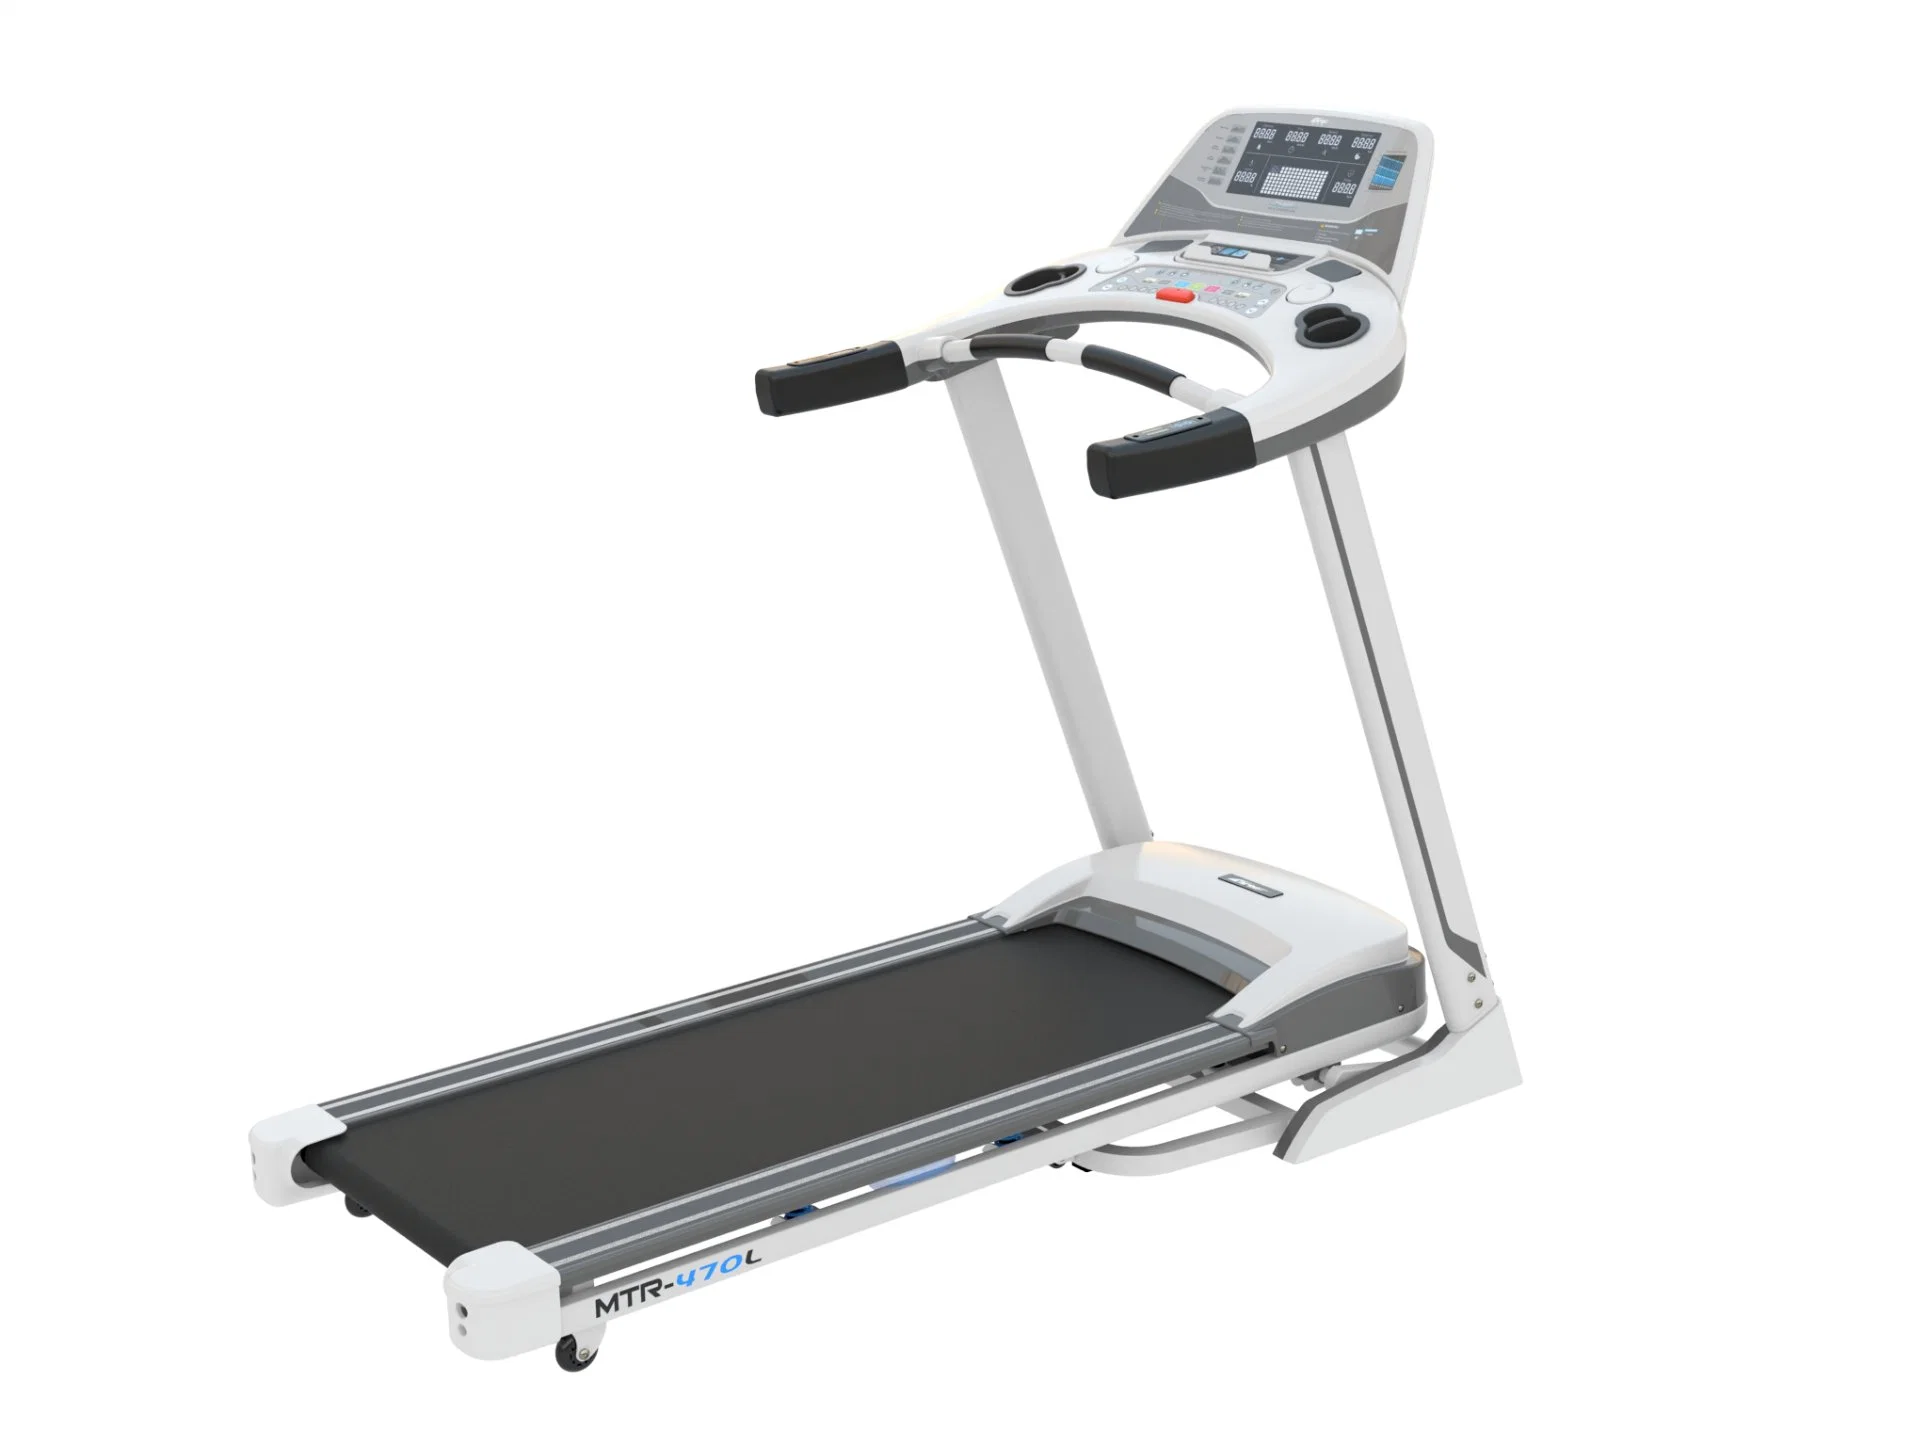 Hot Selling Gym Treadmill Wide Runway Large Running Fitness Equipment Commercial or Home